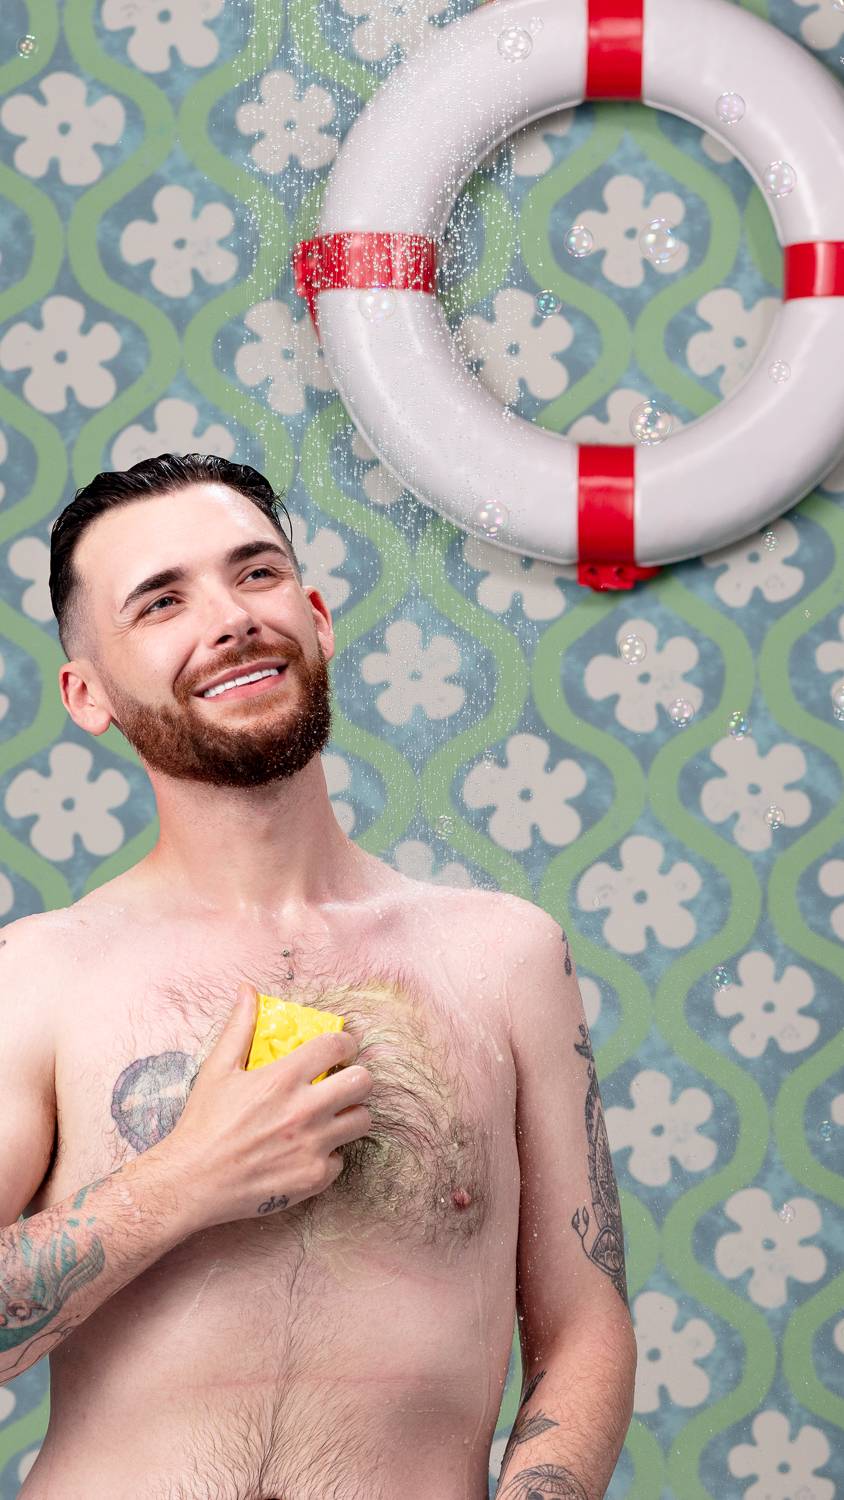 Model is seen in the shower, smiling under running water as they use the Spongebob soap on their chest.